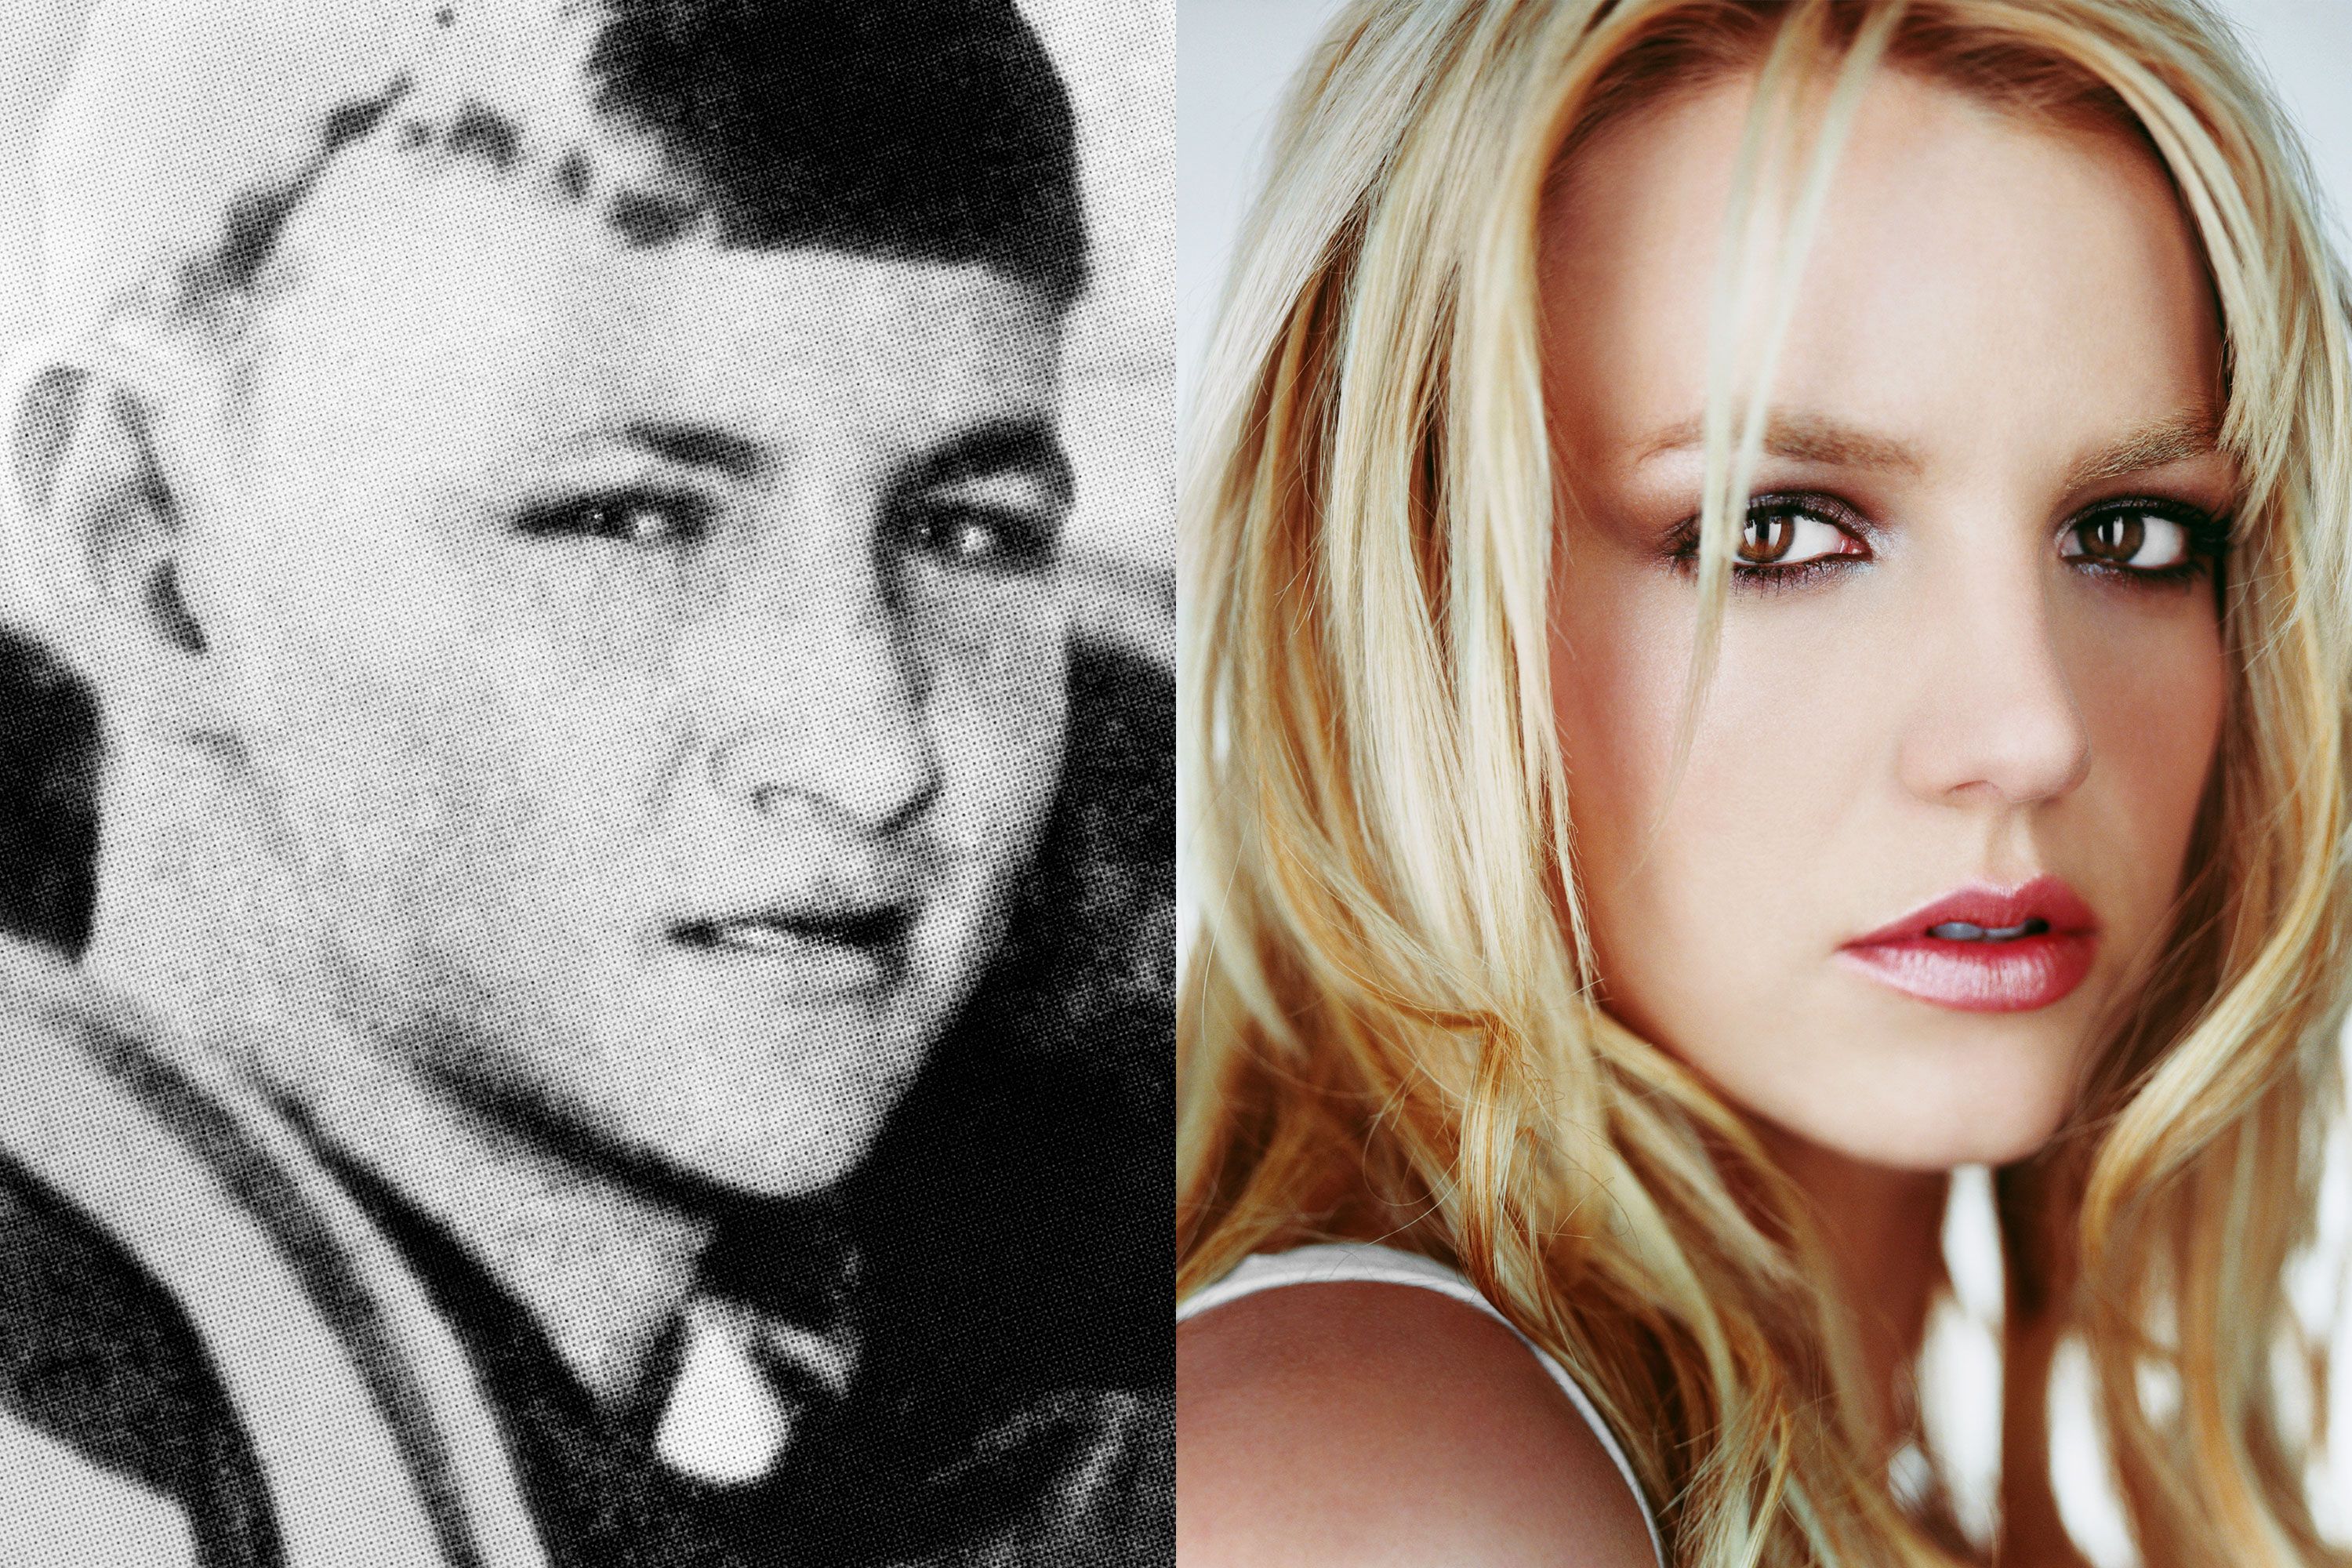 Why Did Jamie Spears Push Britney Into a Conservatorship?